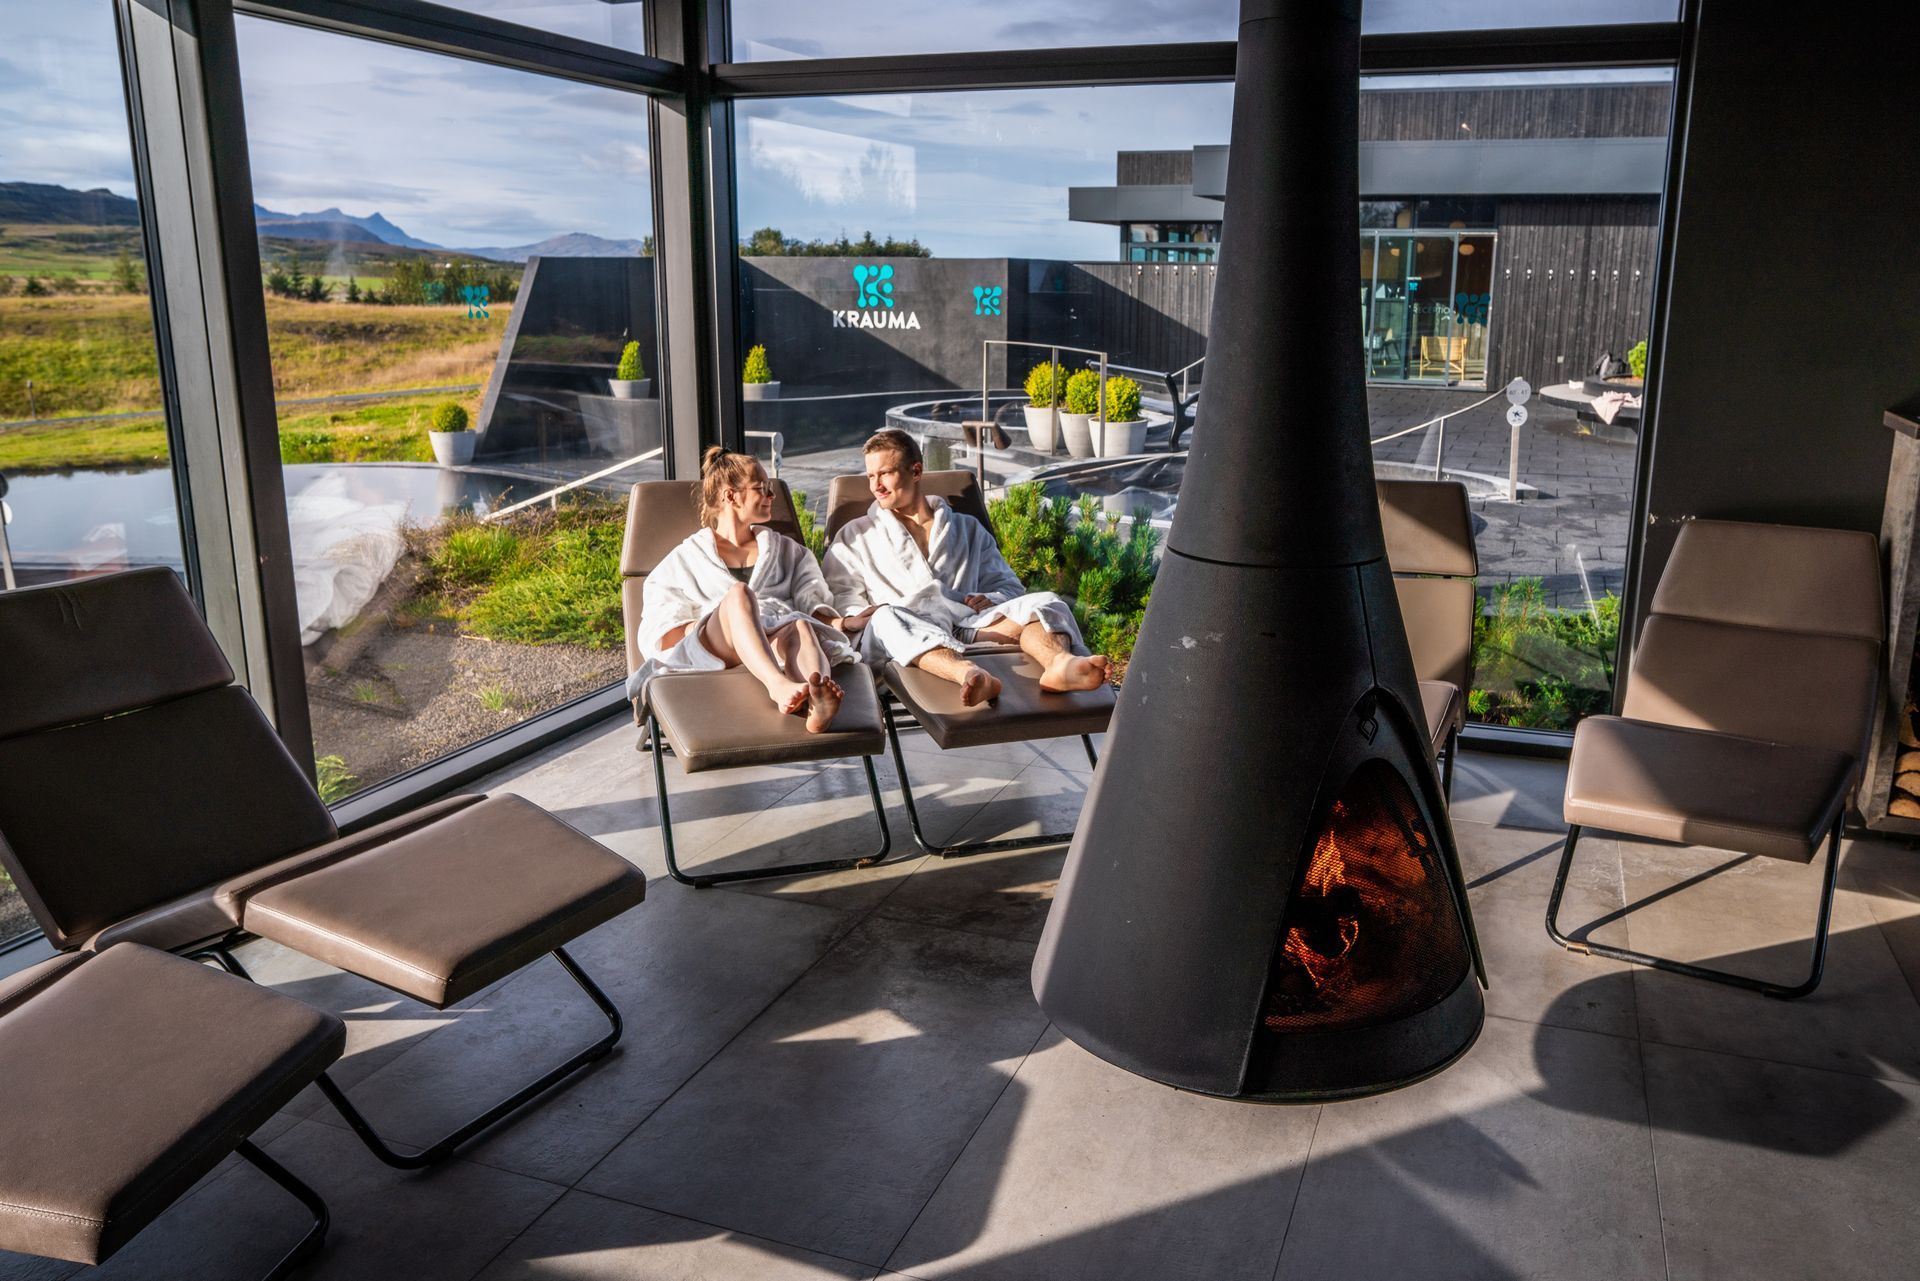 a couple sitting around the fireplace in the relaxation room at Krauma geothermal, with a beautiful large window